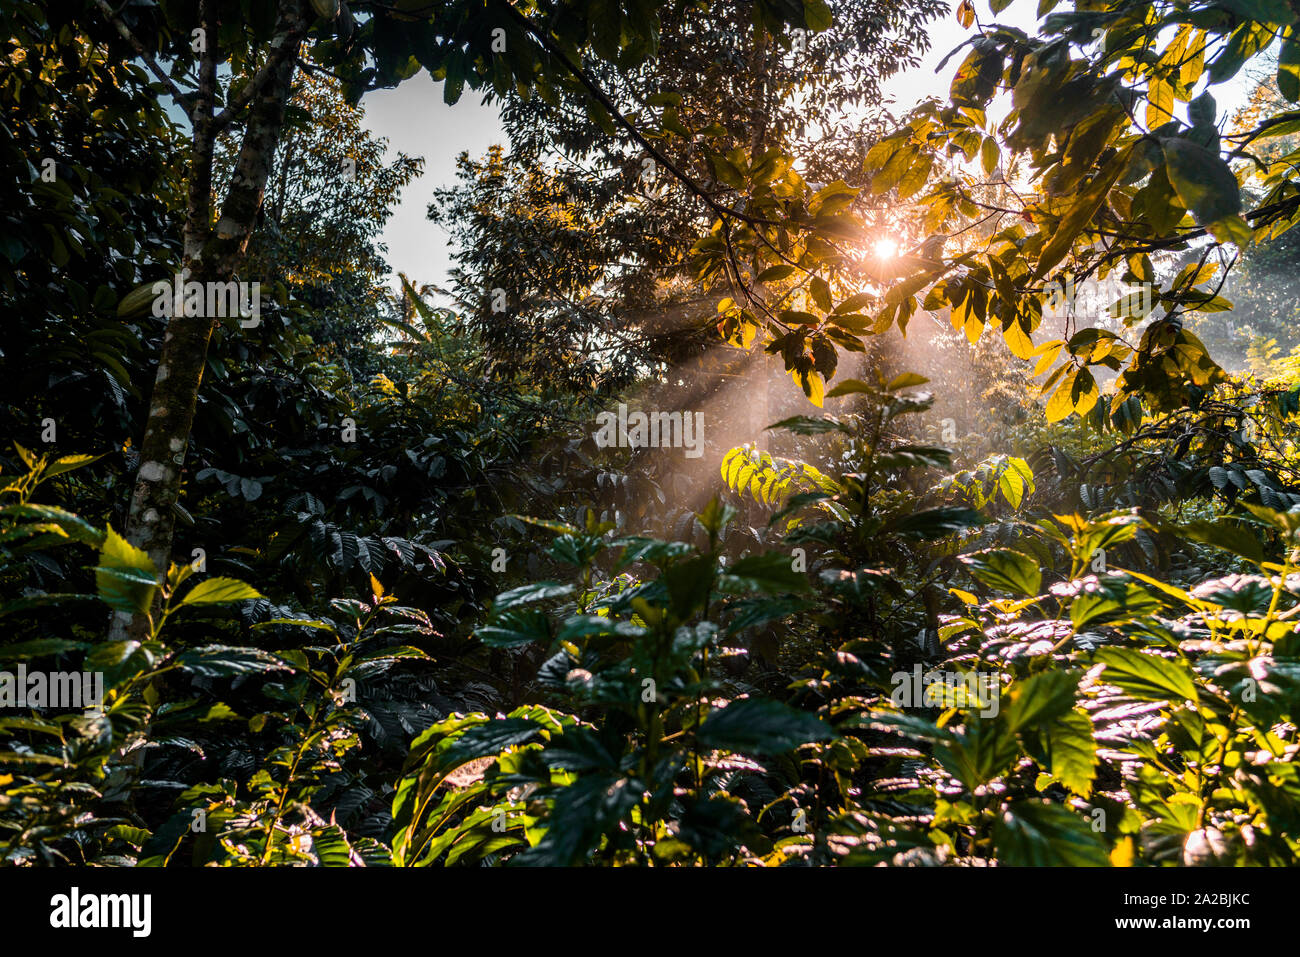 Dense tropical forest at sunrise Stock Photo